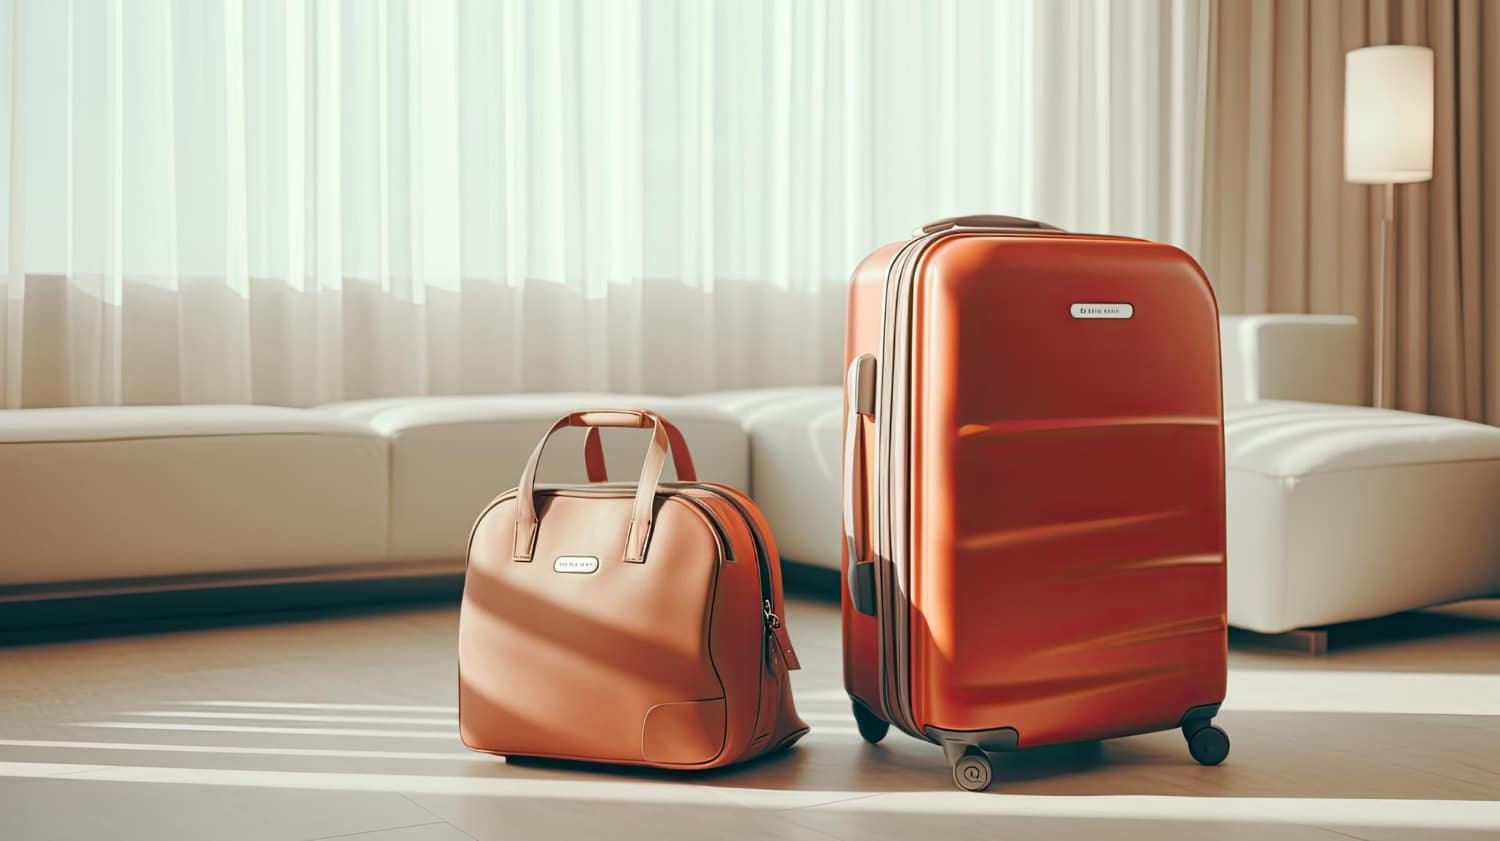 Lo & Sons: Smart, Stylish Travel Bags for the Modern Traveler